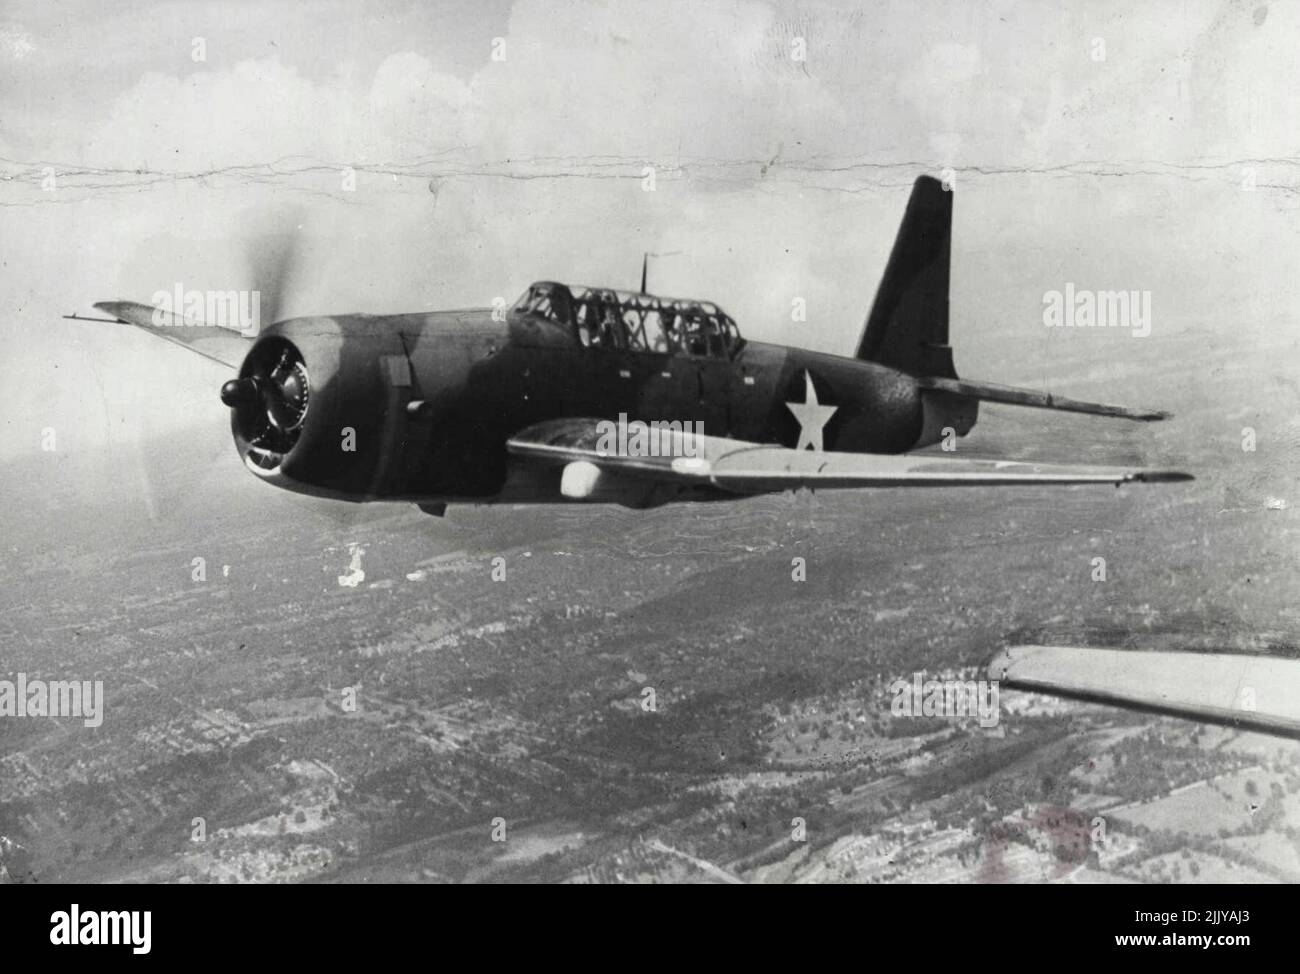 New U.S. Army Dive Bomber -- The A-31, a new U.S. two-seater bomber, is shown in a test flight. Powered by a single air cooled radial engine, it has an unusually long range of operation. The A-31, called the 'Vengeance' by the British, has been in mass production for some time for shipment to United Nations' fighting fronts. February 22, 1943. (Photo by Interphoto News Pictures). Stock Photo